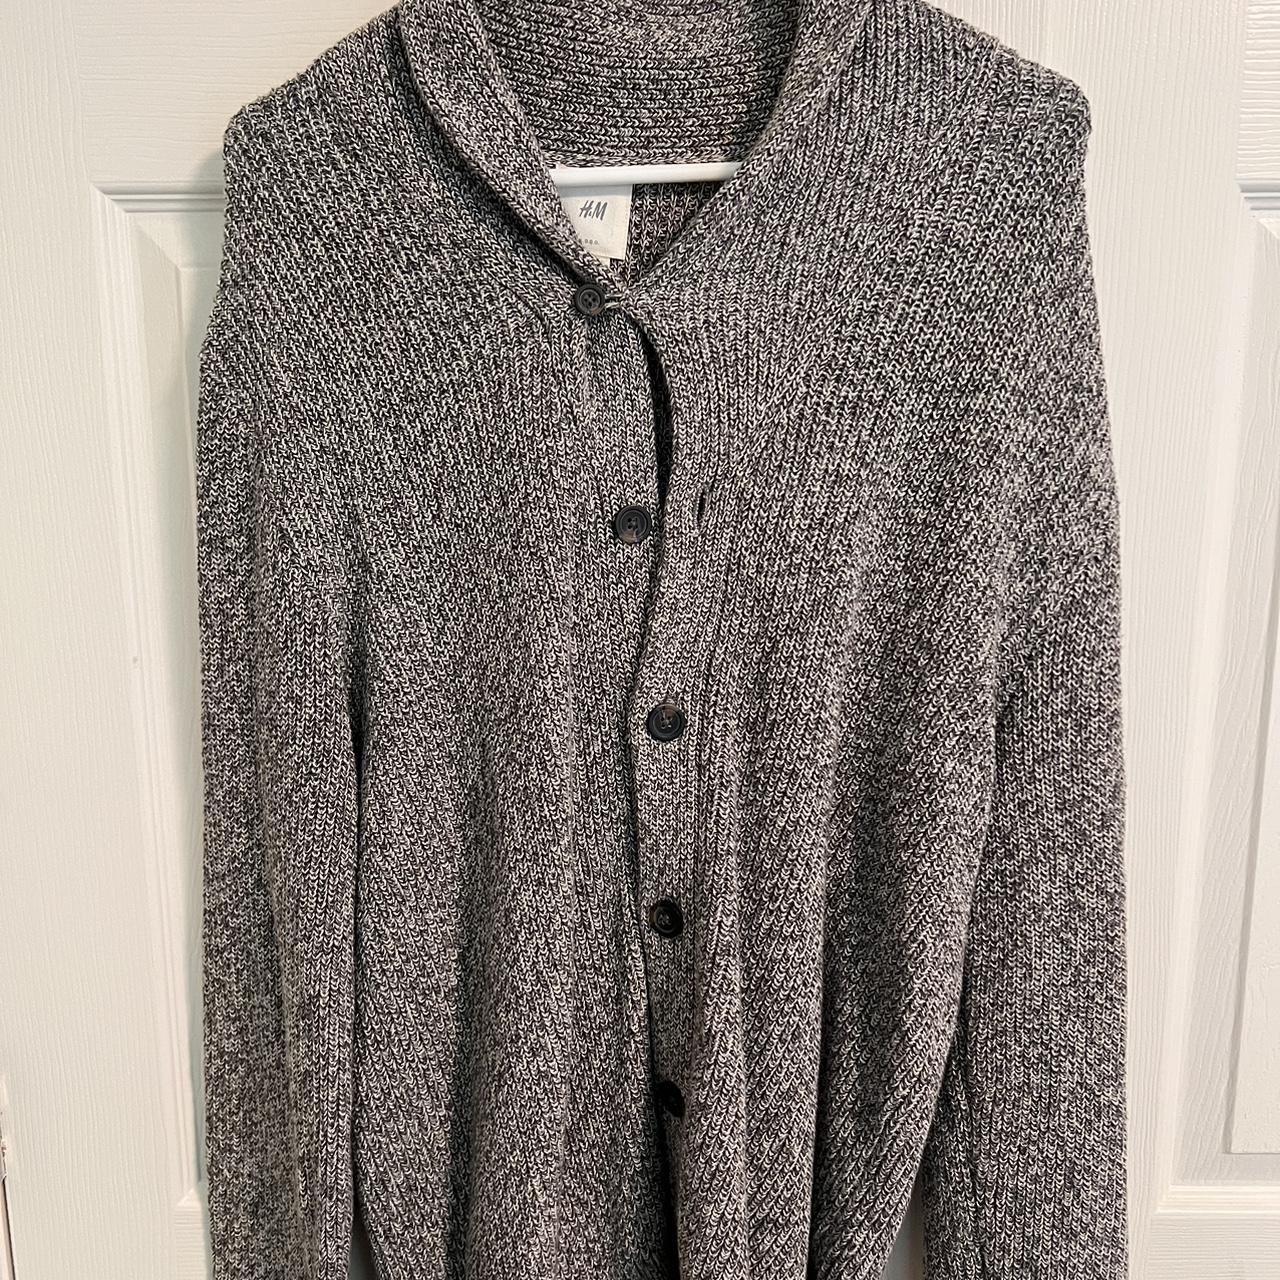 H&M great button up sweater - Depop